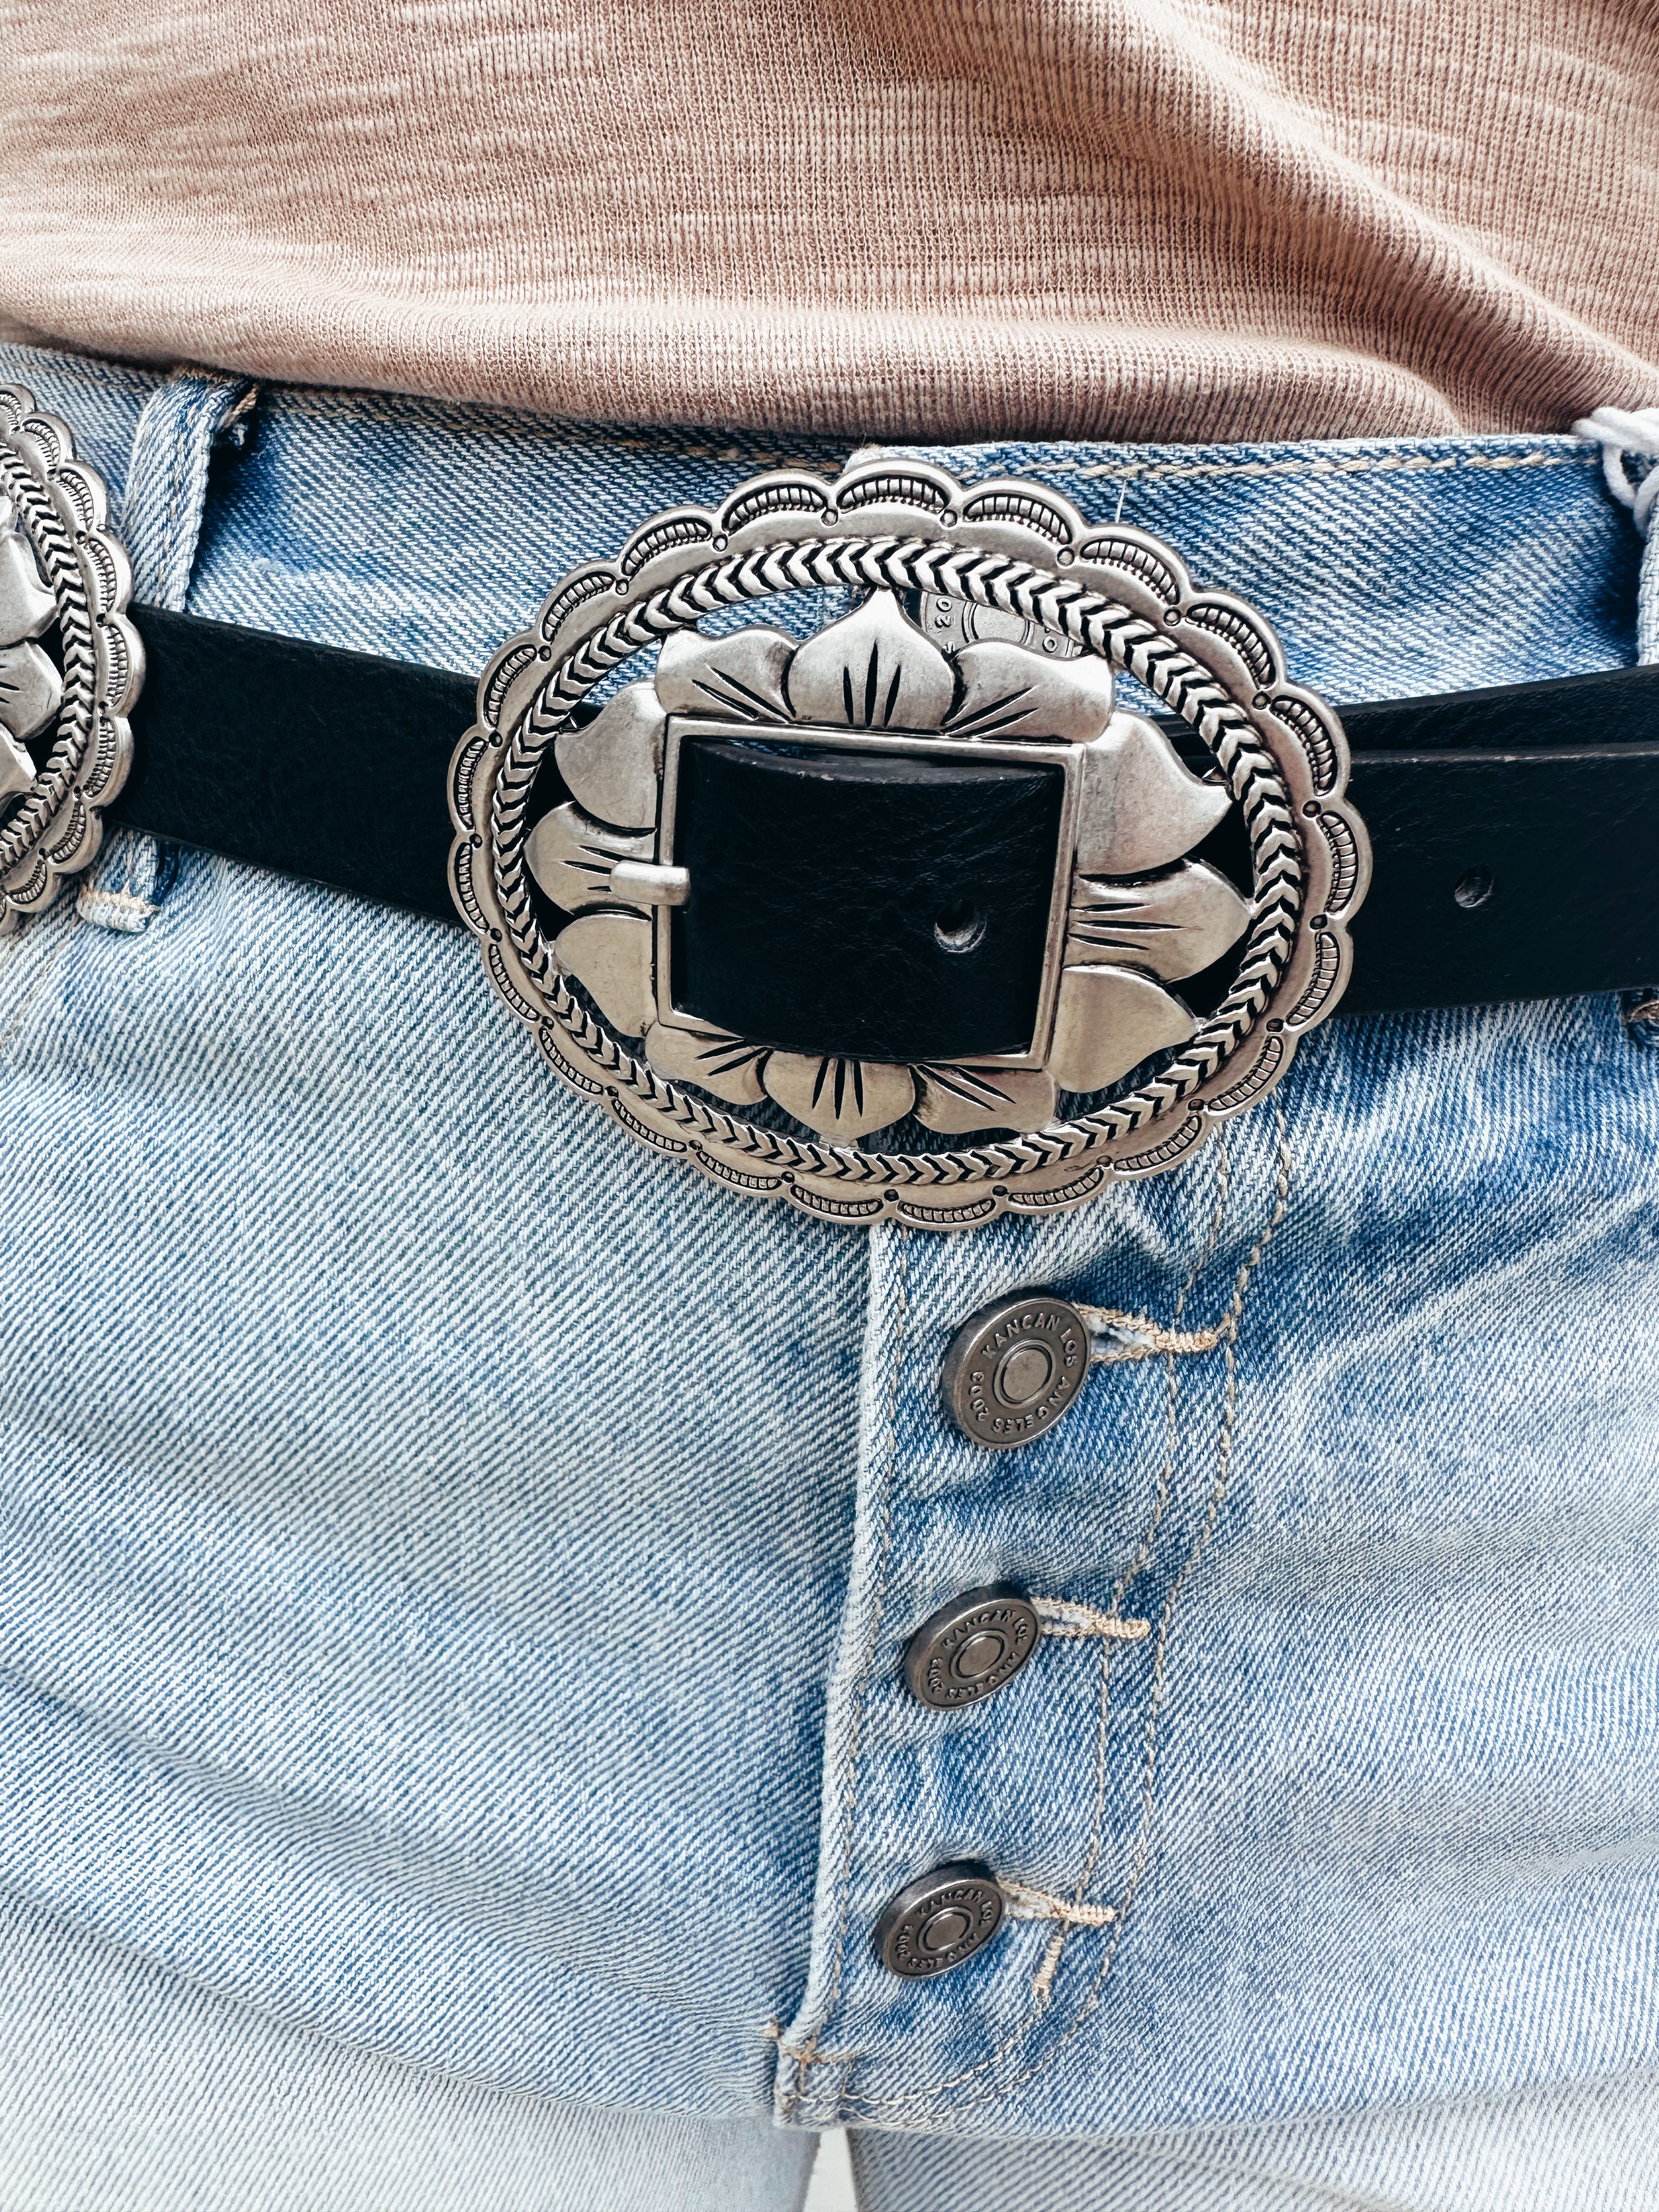 The Makers Belt